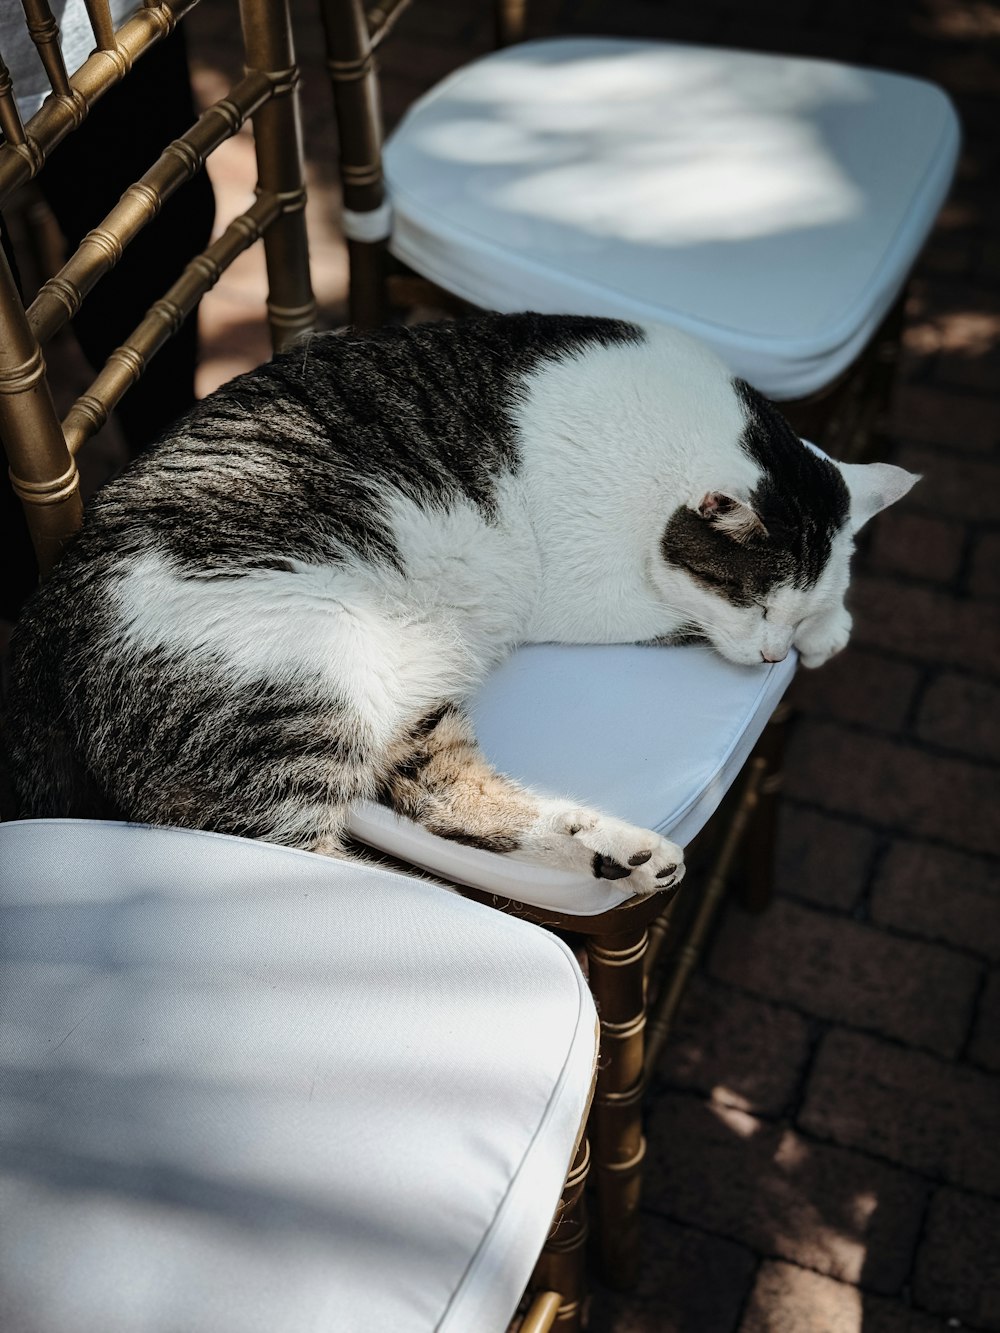 a black and white cat sleeping on a chair